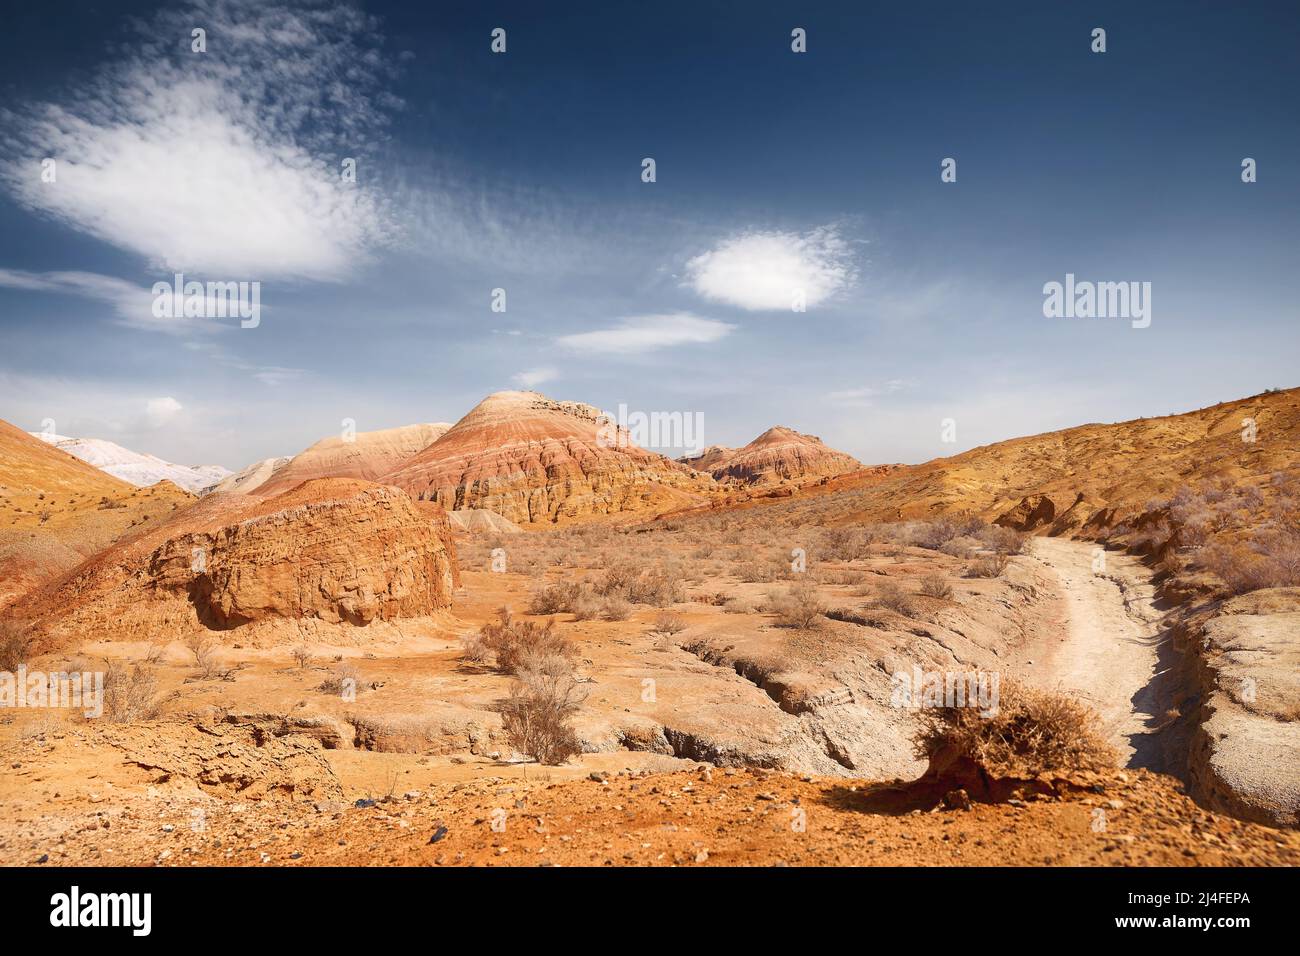 Landscape of Red with stripe bizarre layered mountains in canyon in beautiful desert park with dry plant at foreground Stock Photo